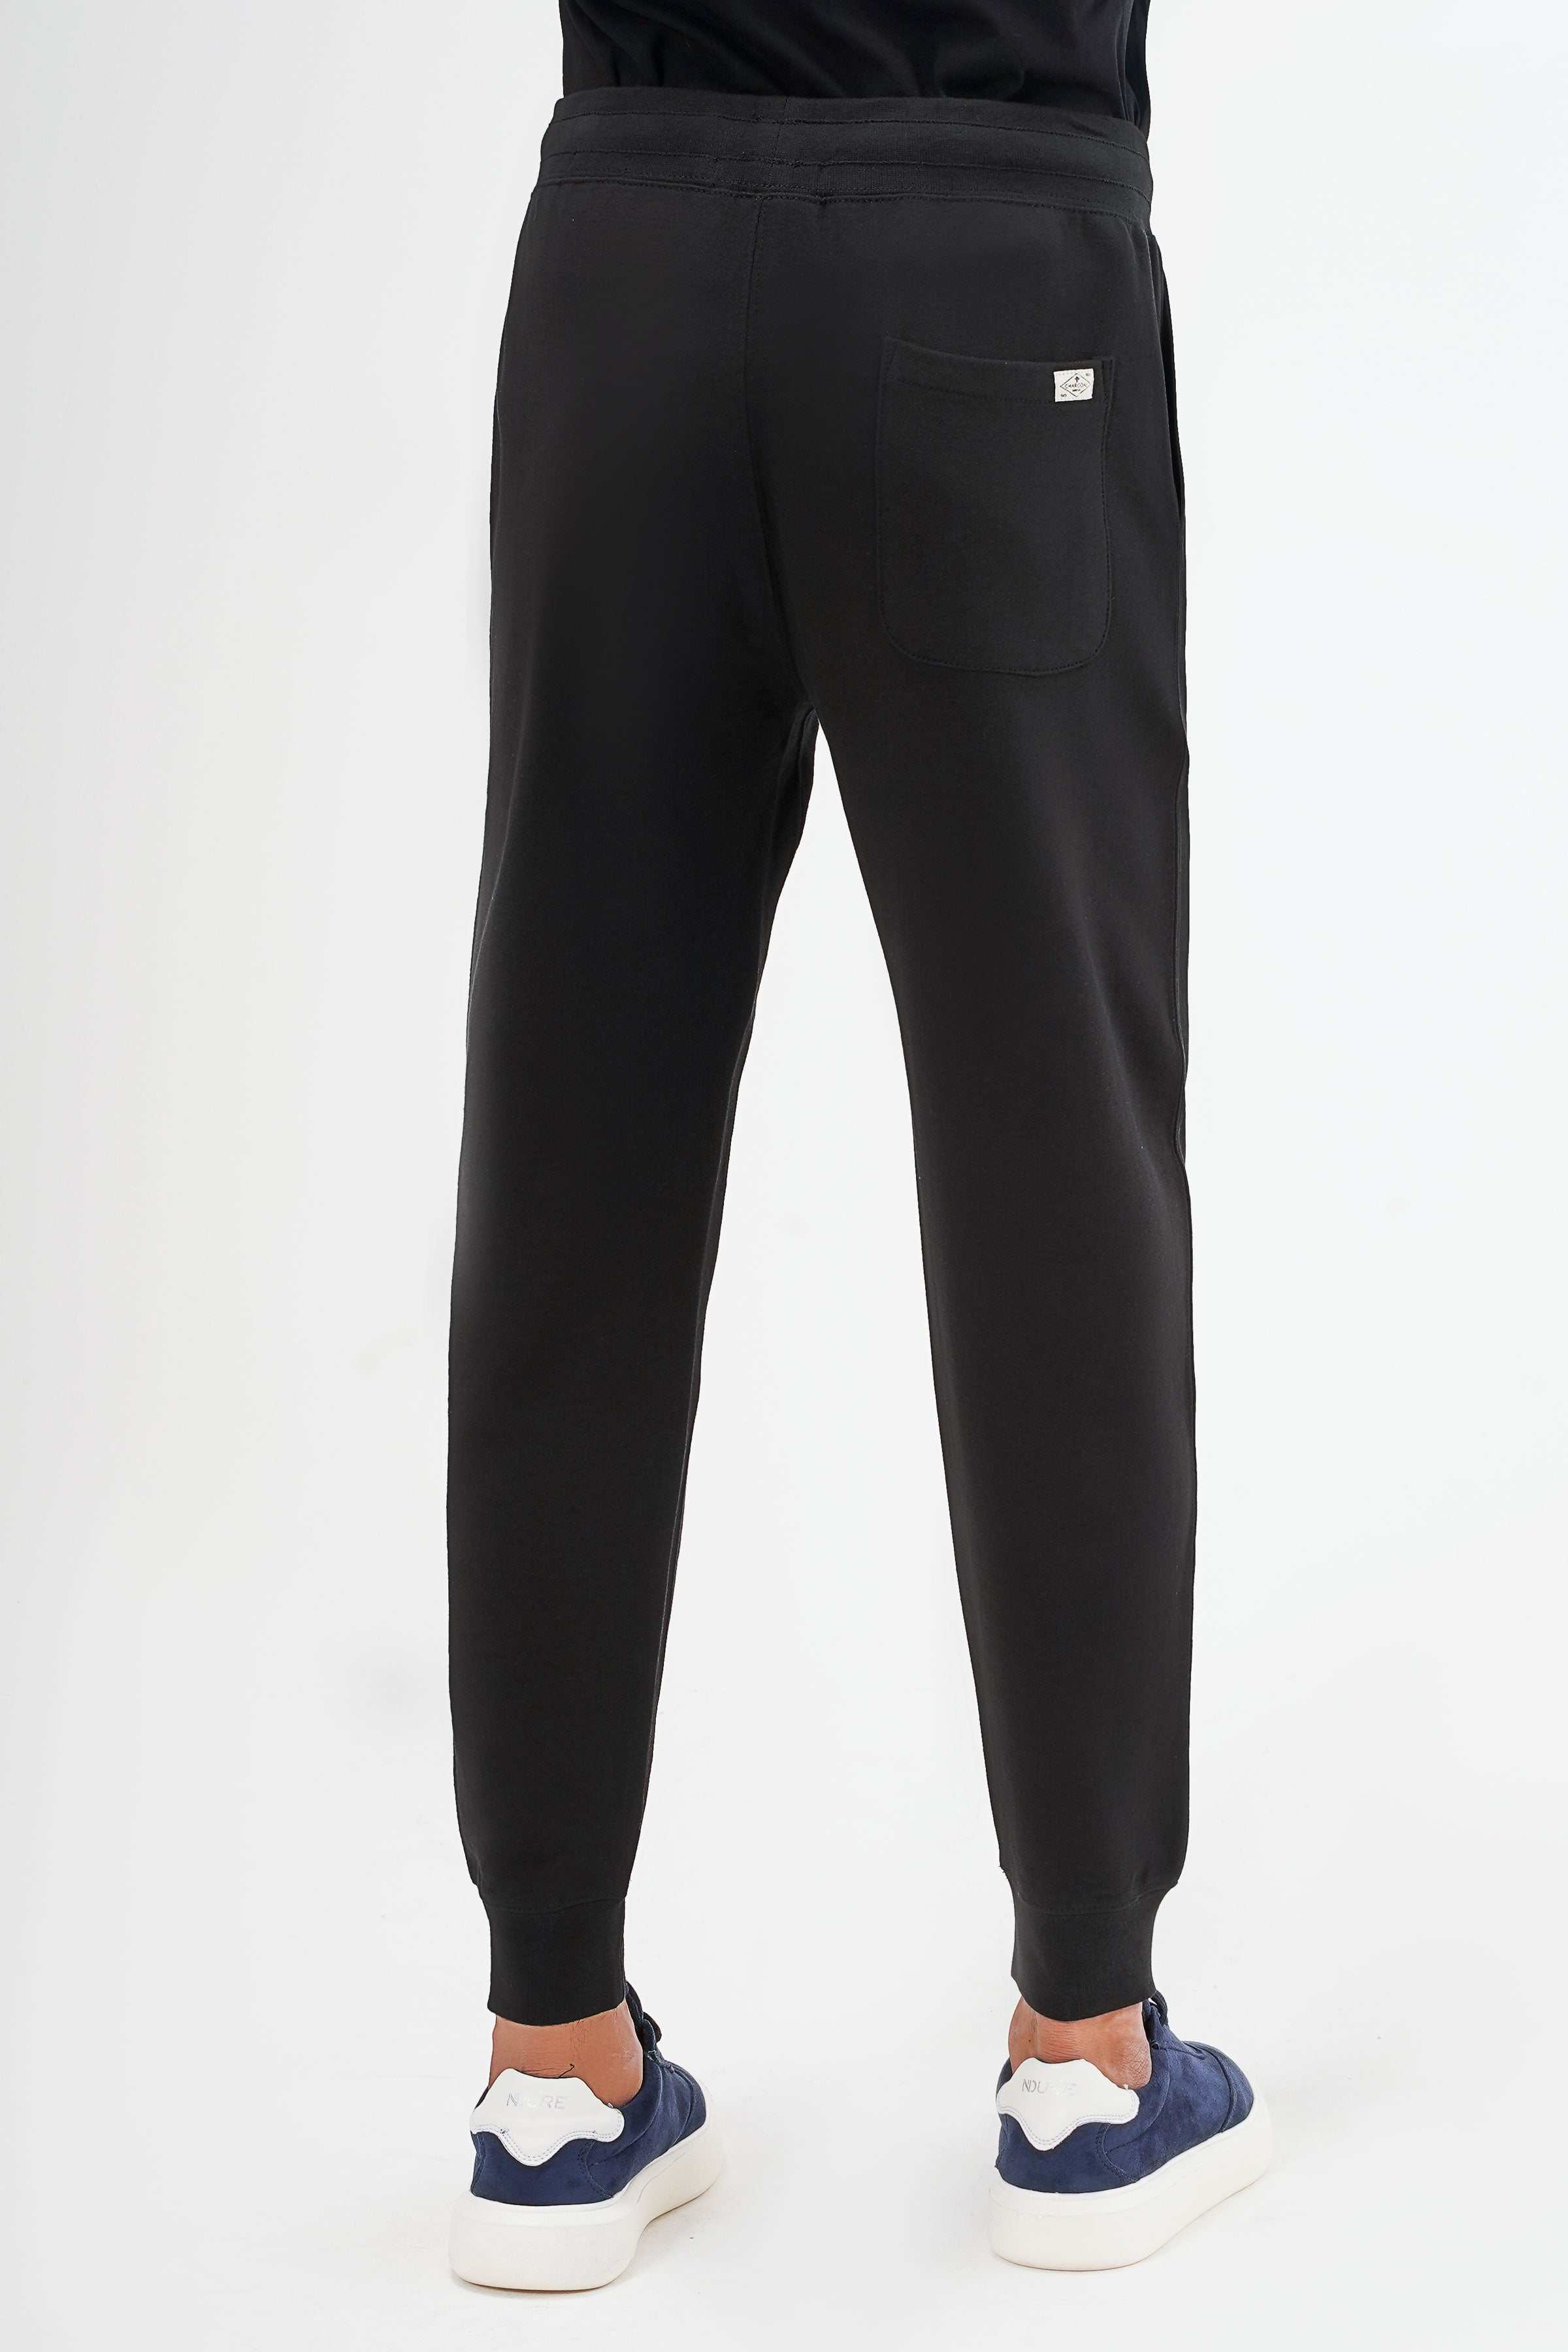 TERRY JOGGER TROUSER BLACK at Charcoal Clothing